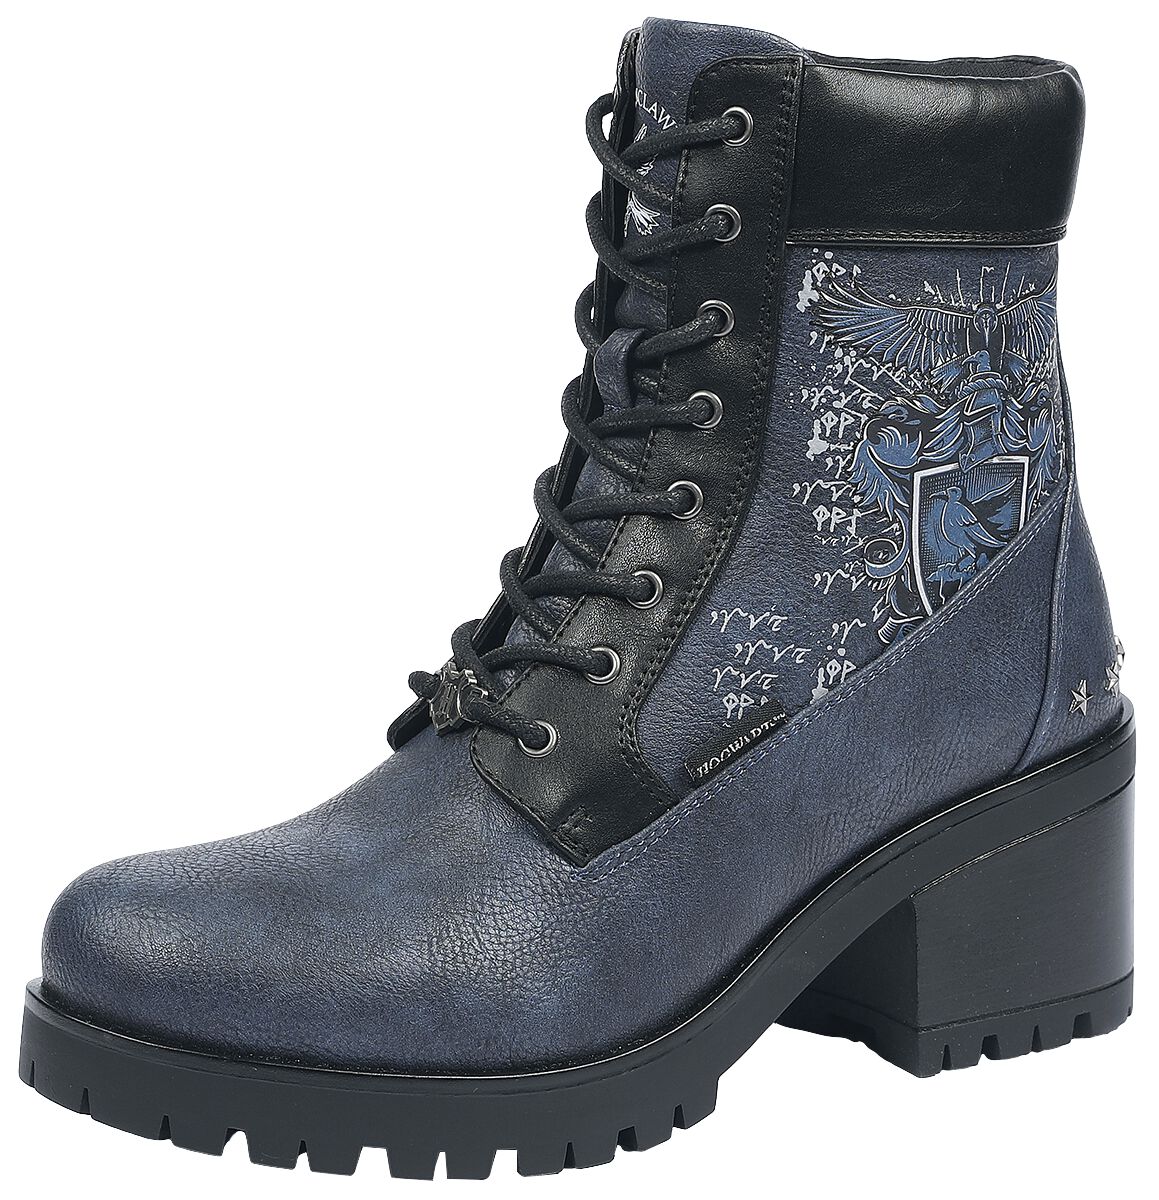 Harry Potter Ravenclaw Laced Boots dark blue